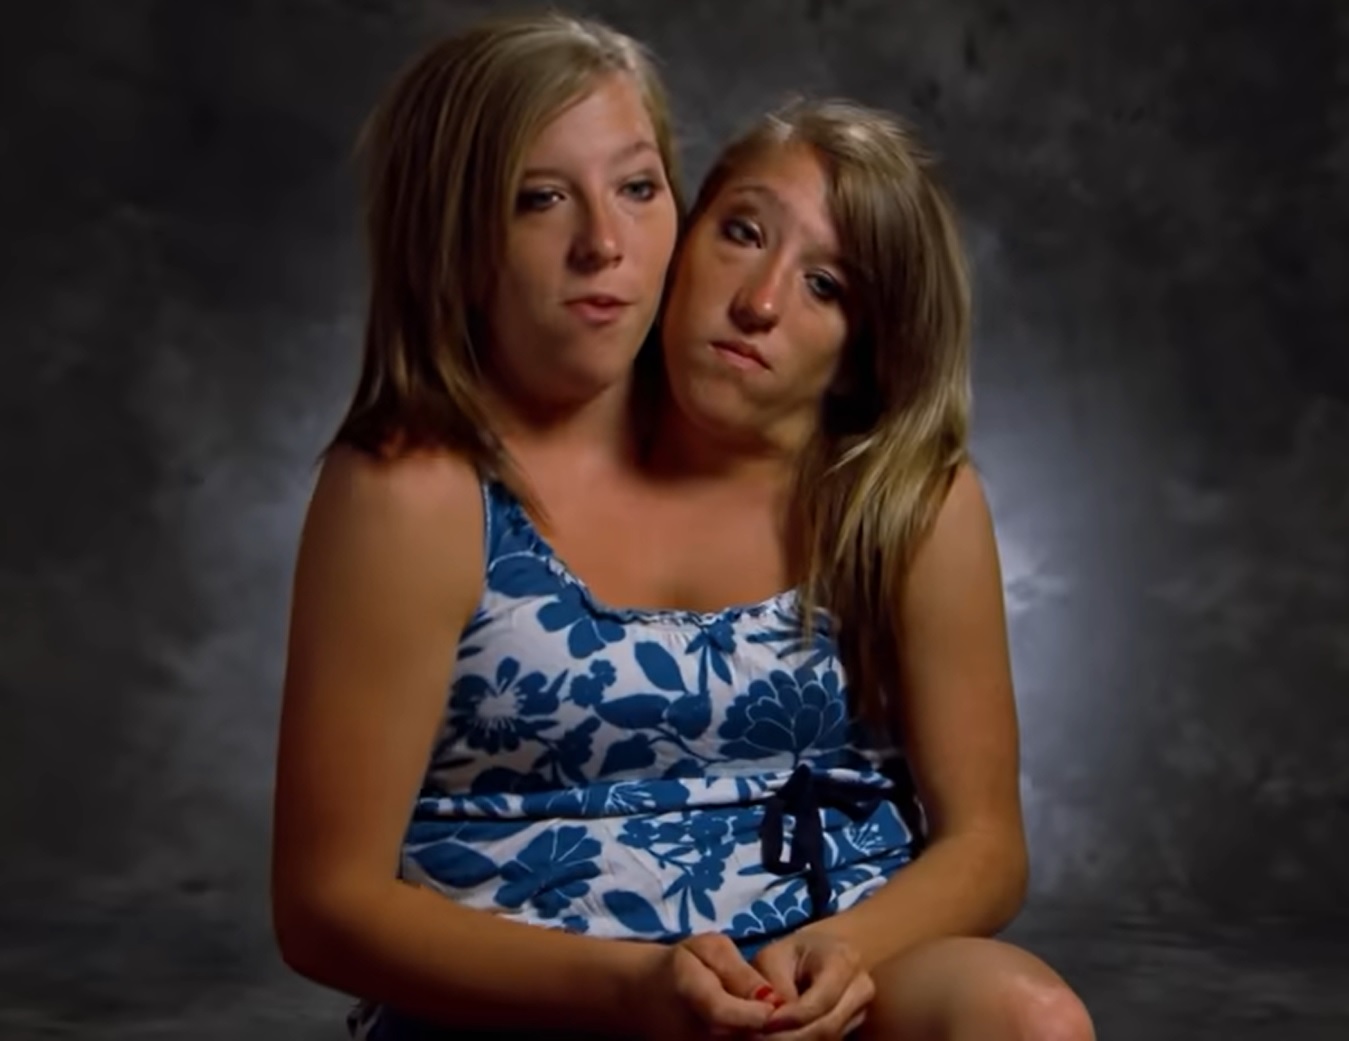 Abby And Brittany Hensel Are The World's Most Famous Conjoined Twins